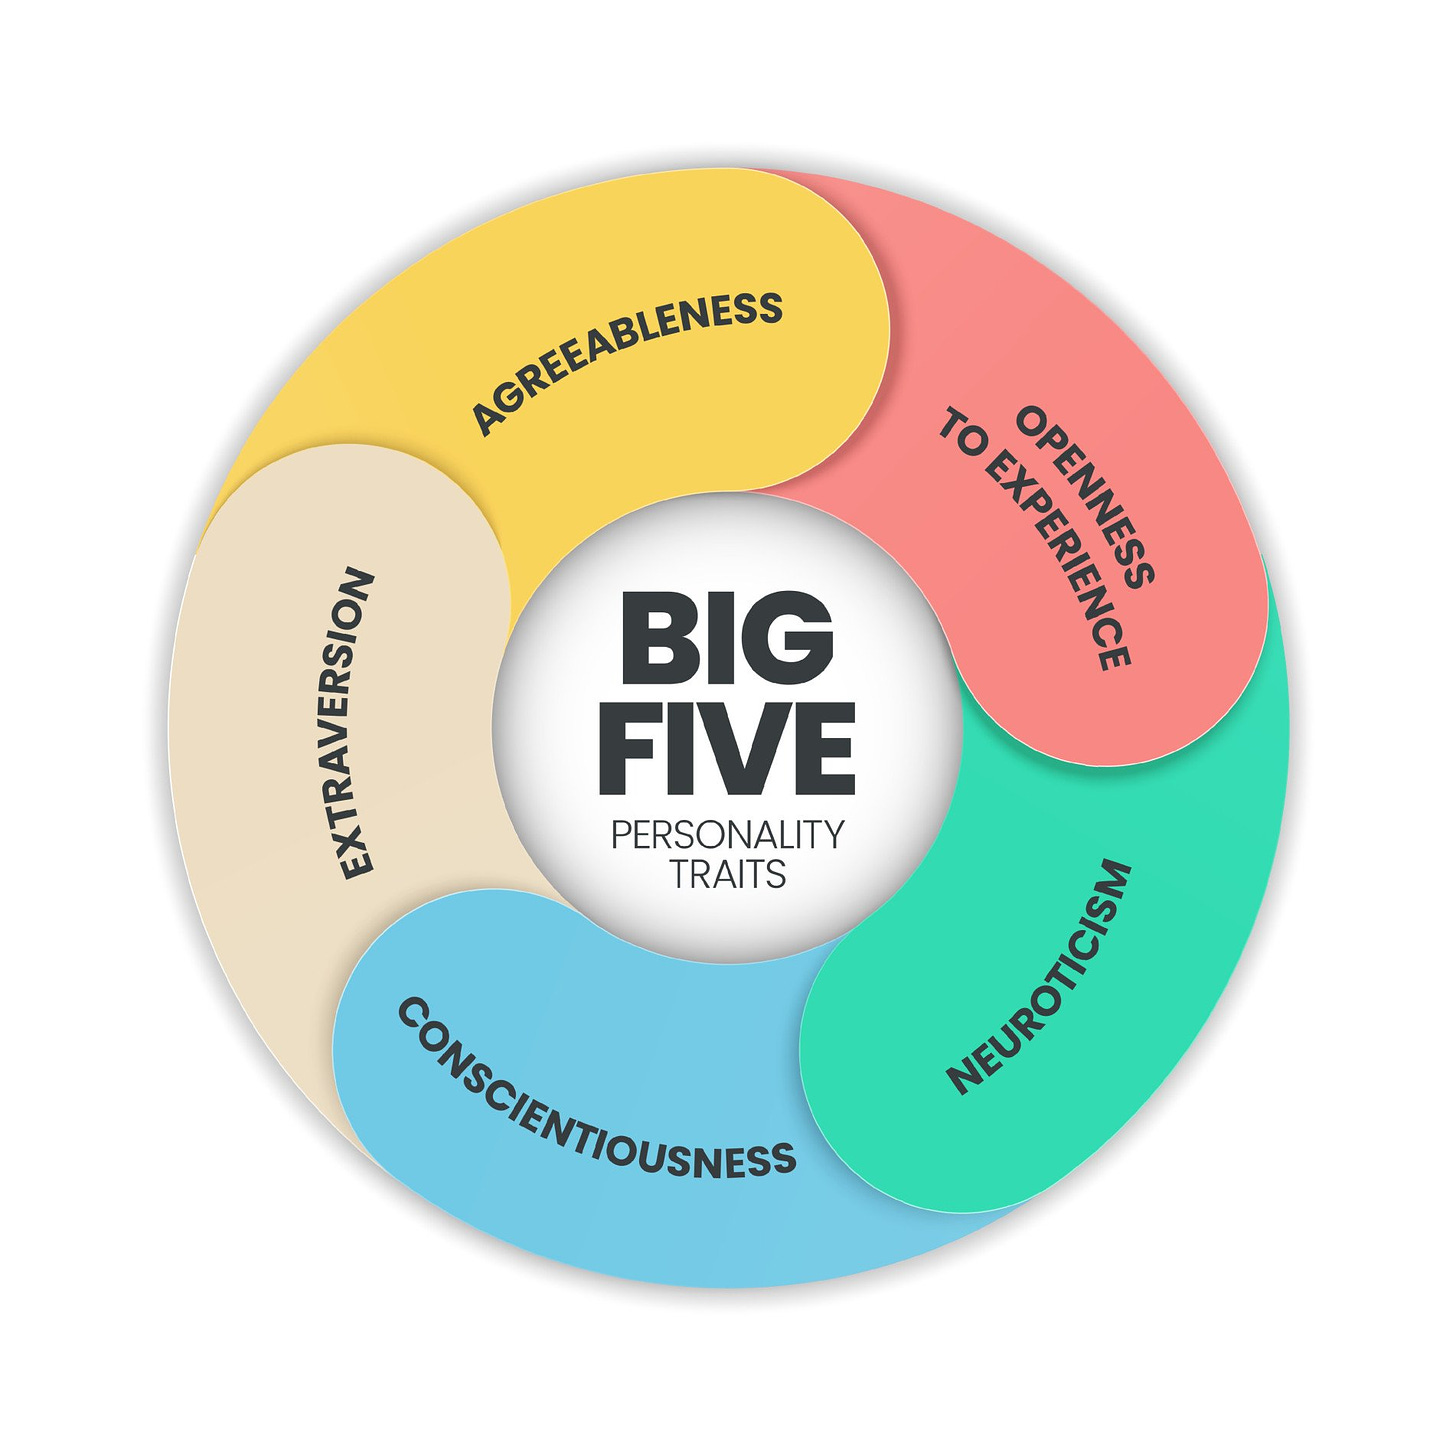 Big Five Personality Traits: The 5-Factor Model of Personality